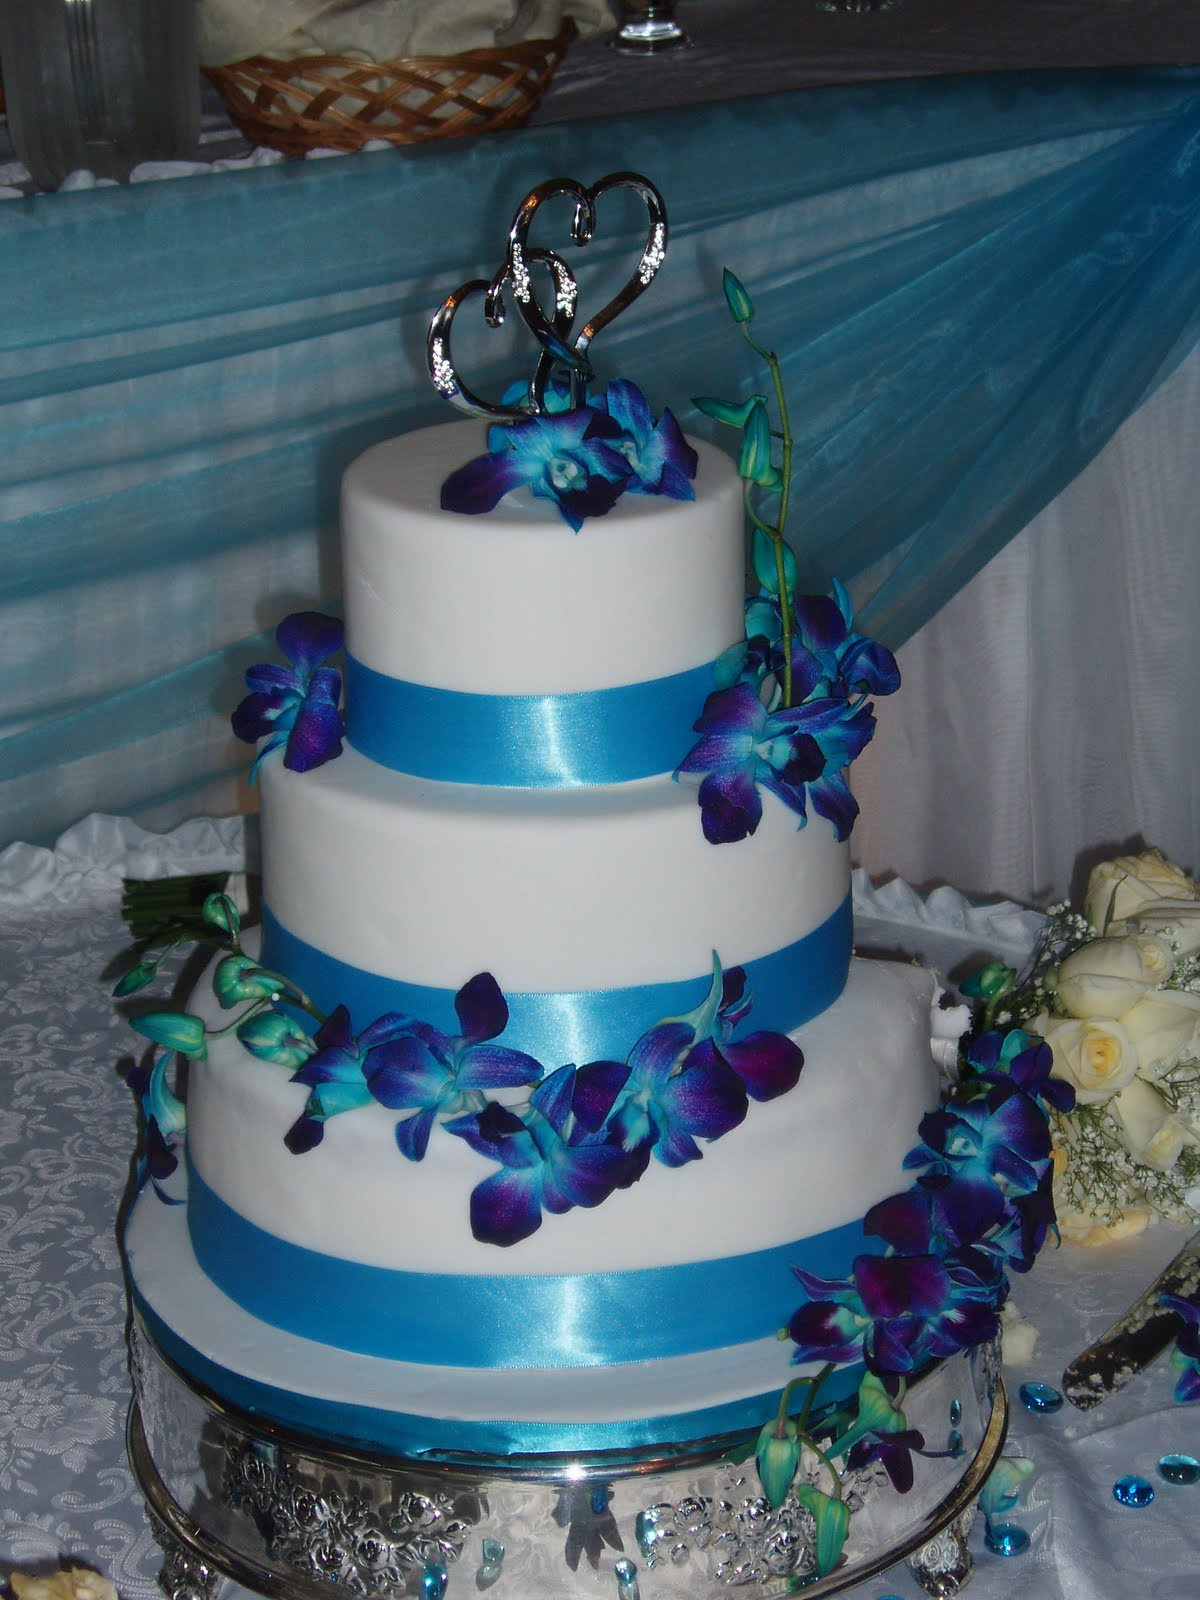 Wedding Cakes With Orchids
 SugarBakers Cake Design Blue Orchid Wedding Cake